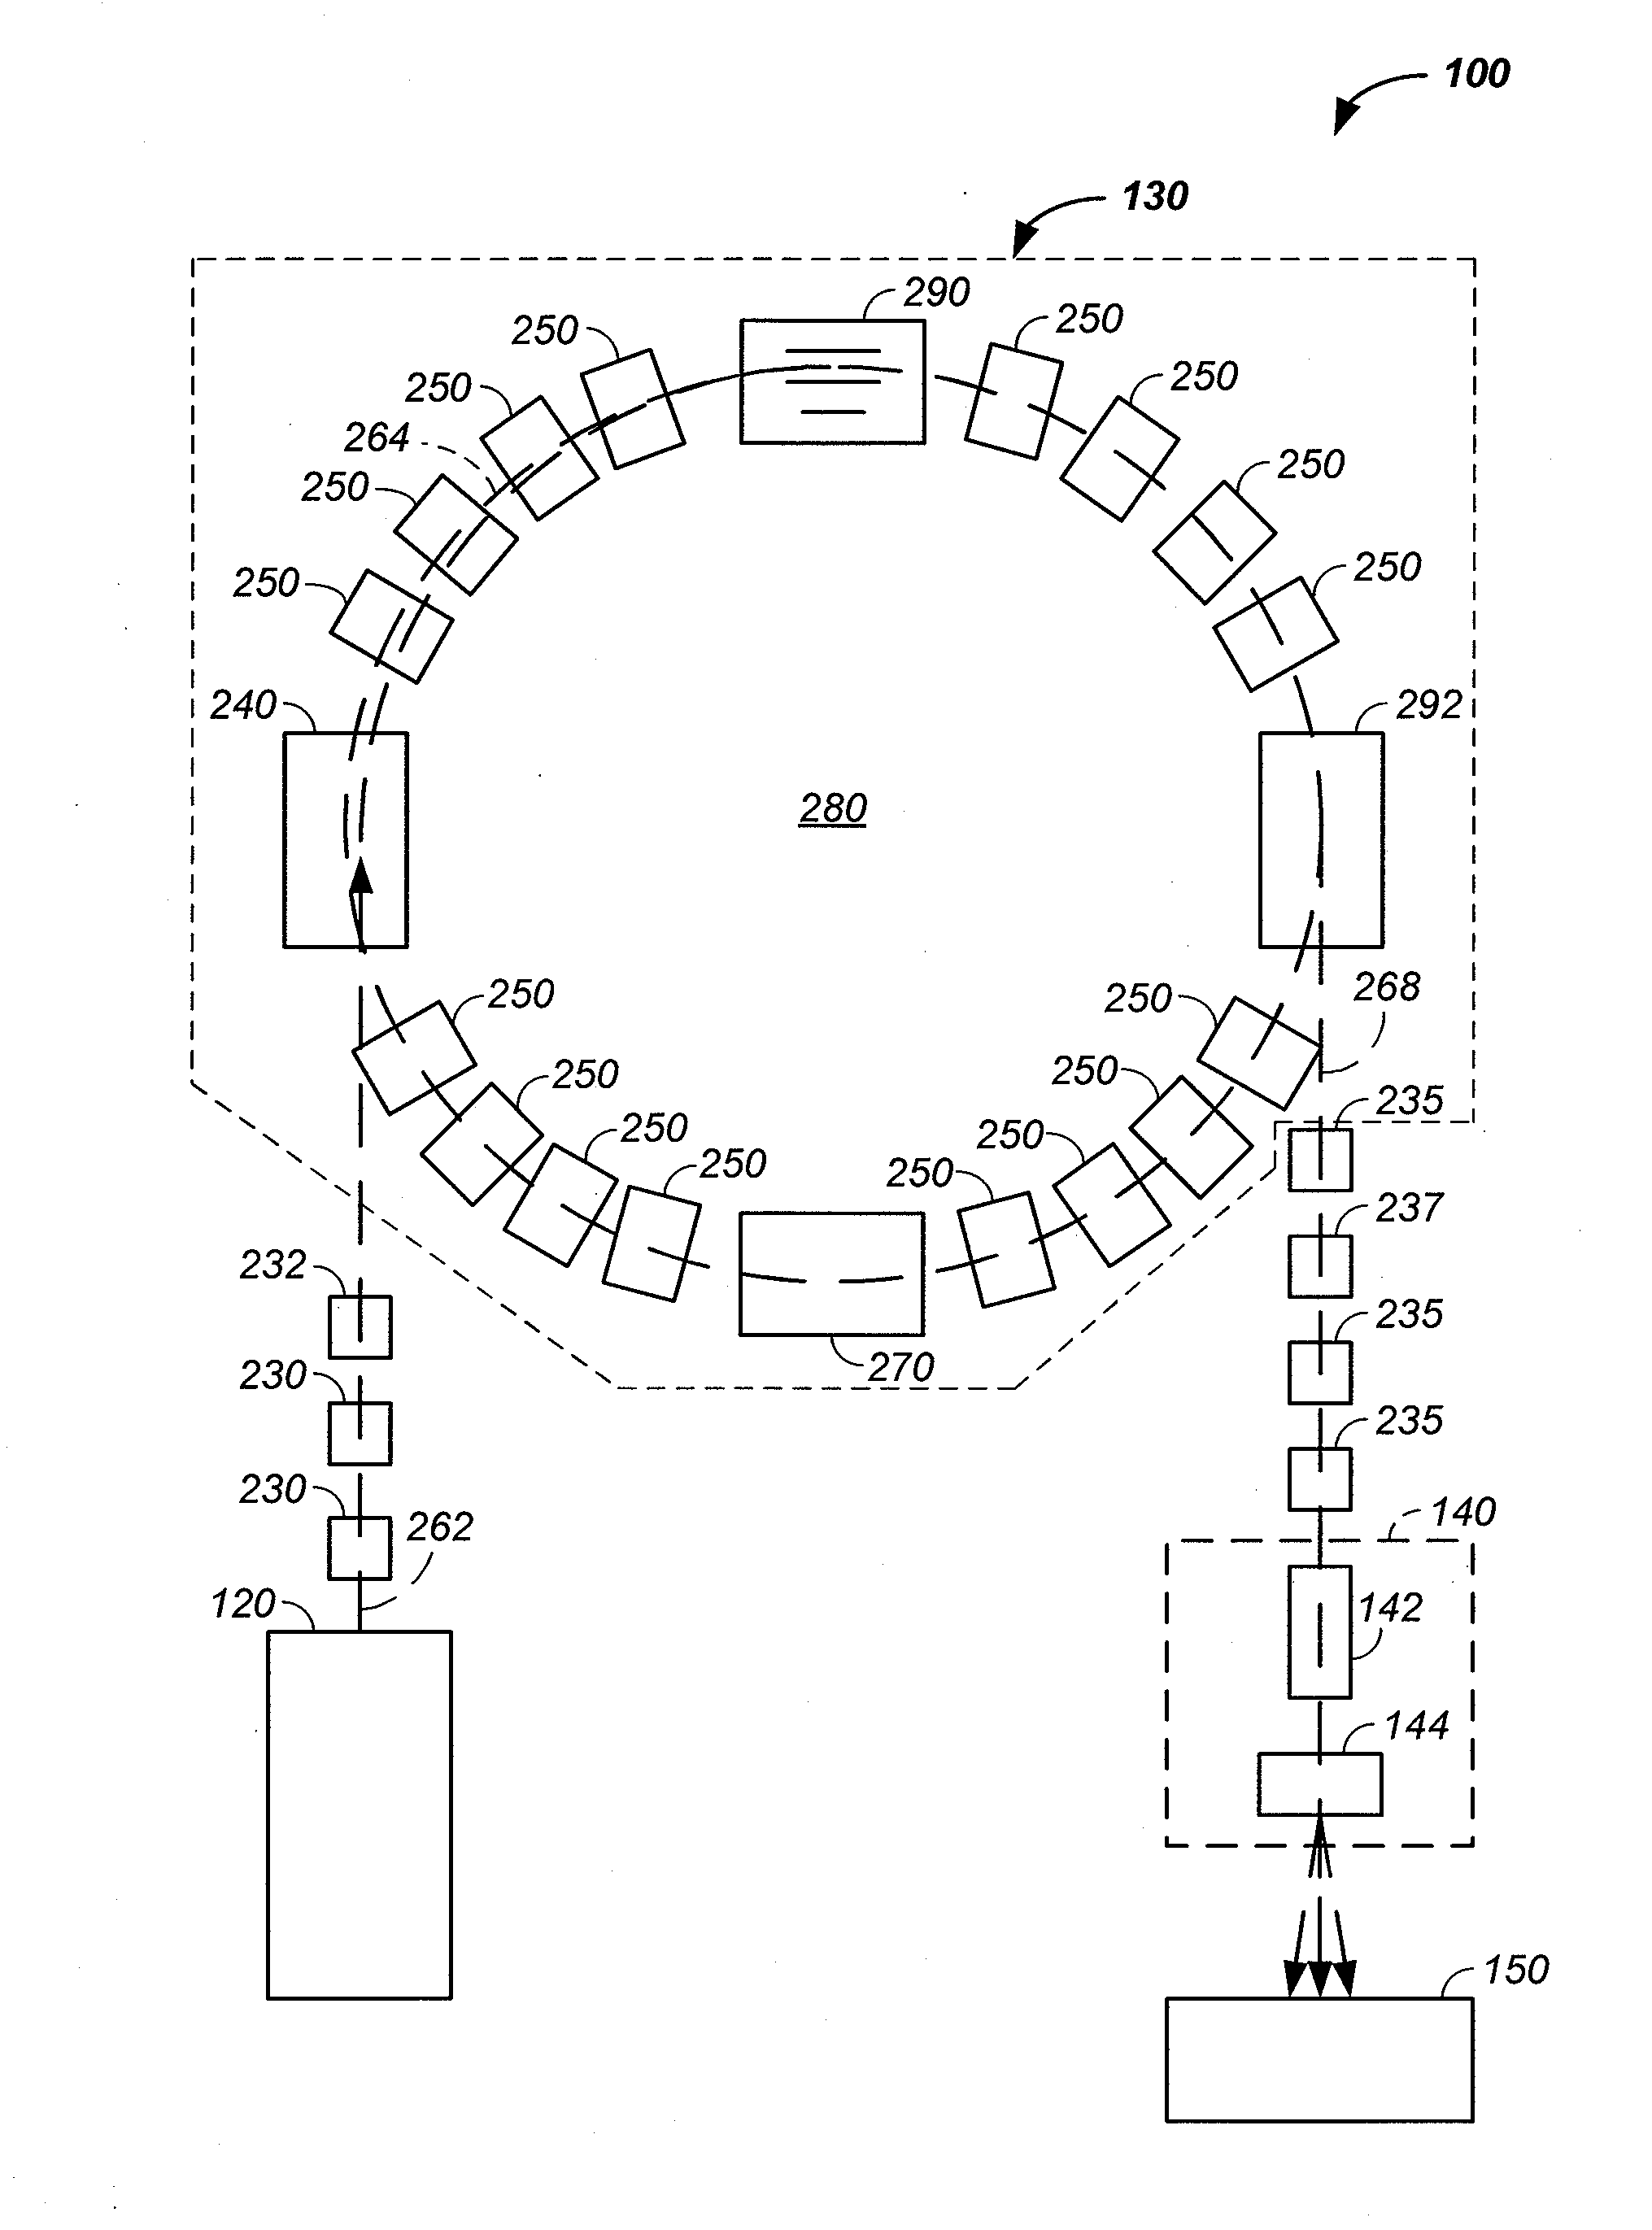 Charged particle beam extraction method and apparatus used in conjunction with a charged particle cancer therapy system